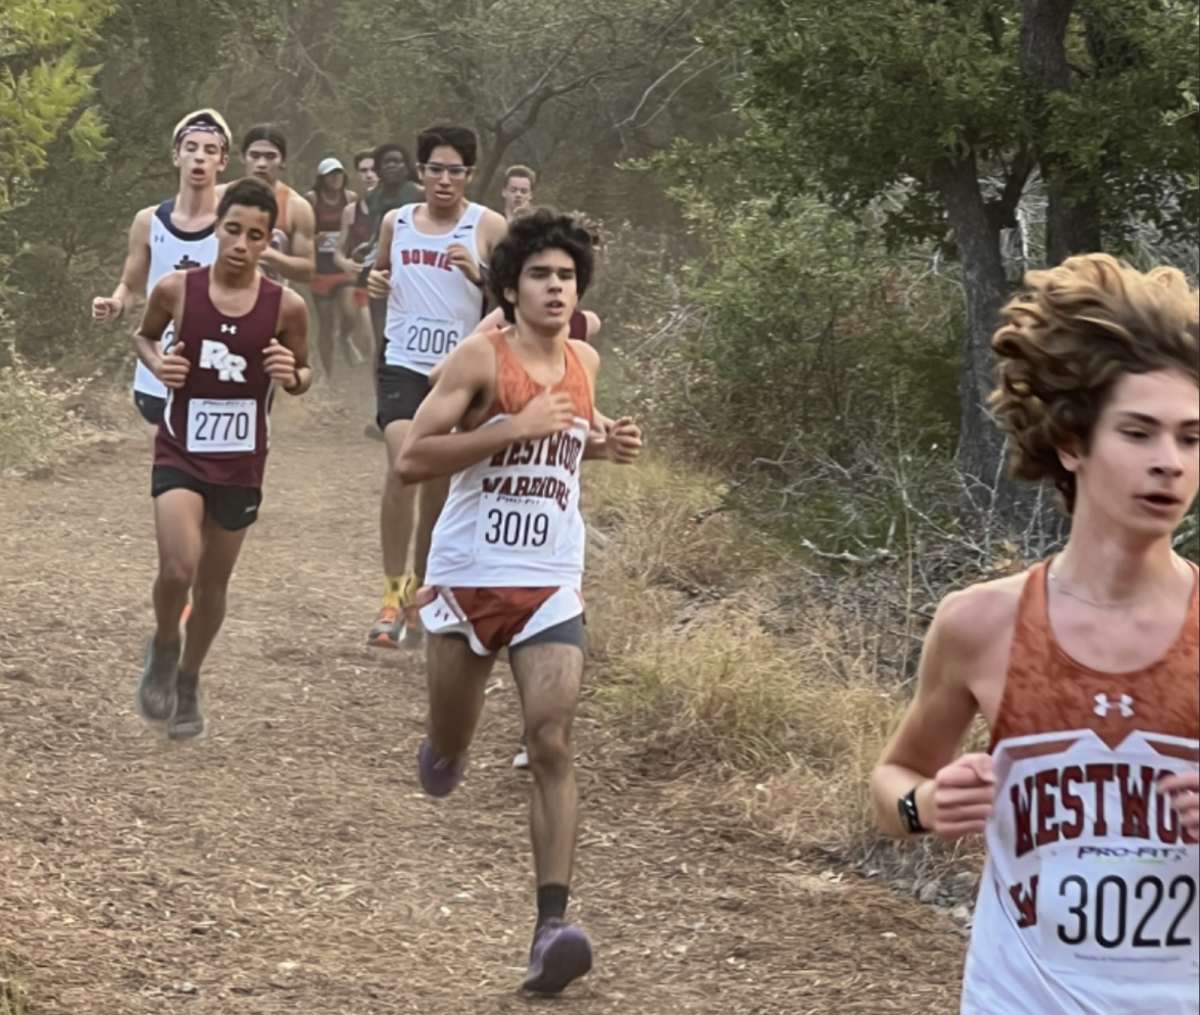 Storming+through+the+course%2C+the+Westwood+cross+country+team+competes+in+their+first+meet+of+the+season+at+Vista+Ridge.+The+Warriors+looked+to+start+off+their+season+strong+with+a+good+performance+all+around.+